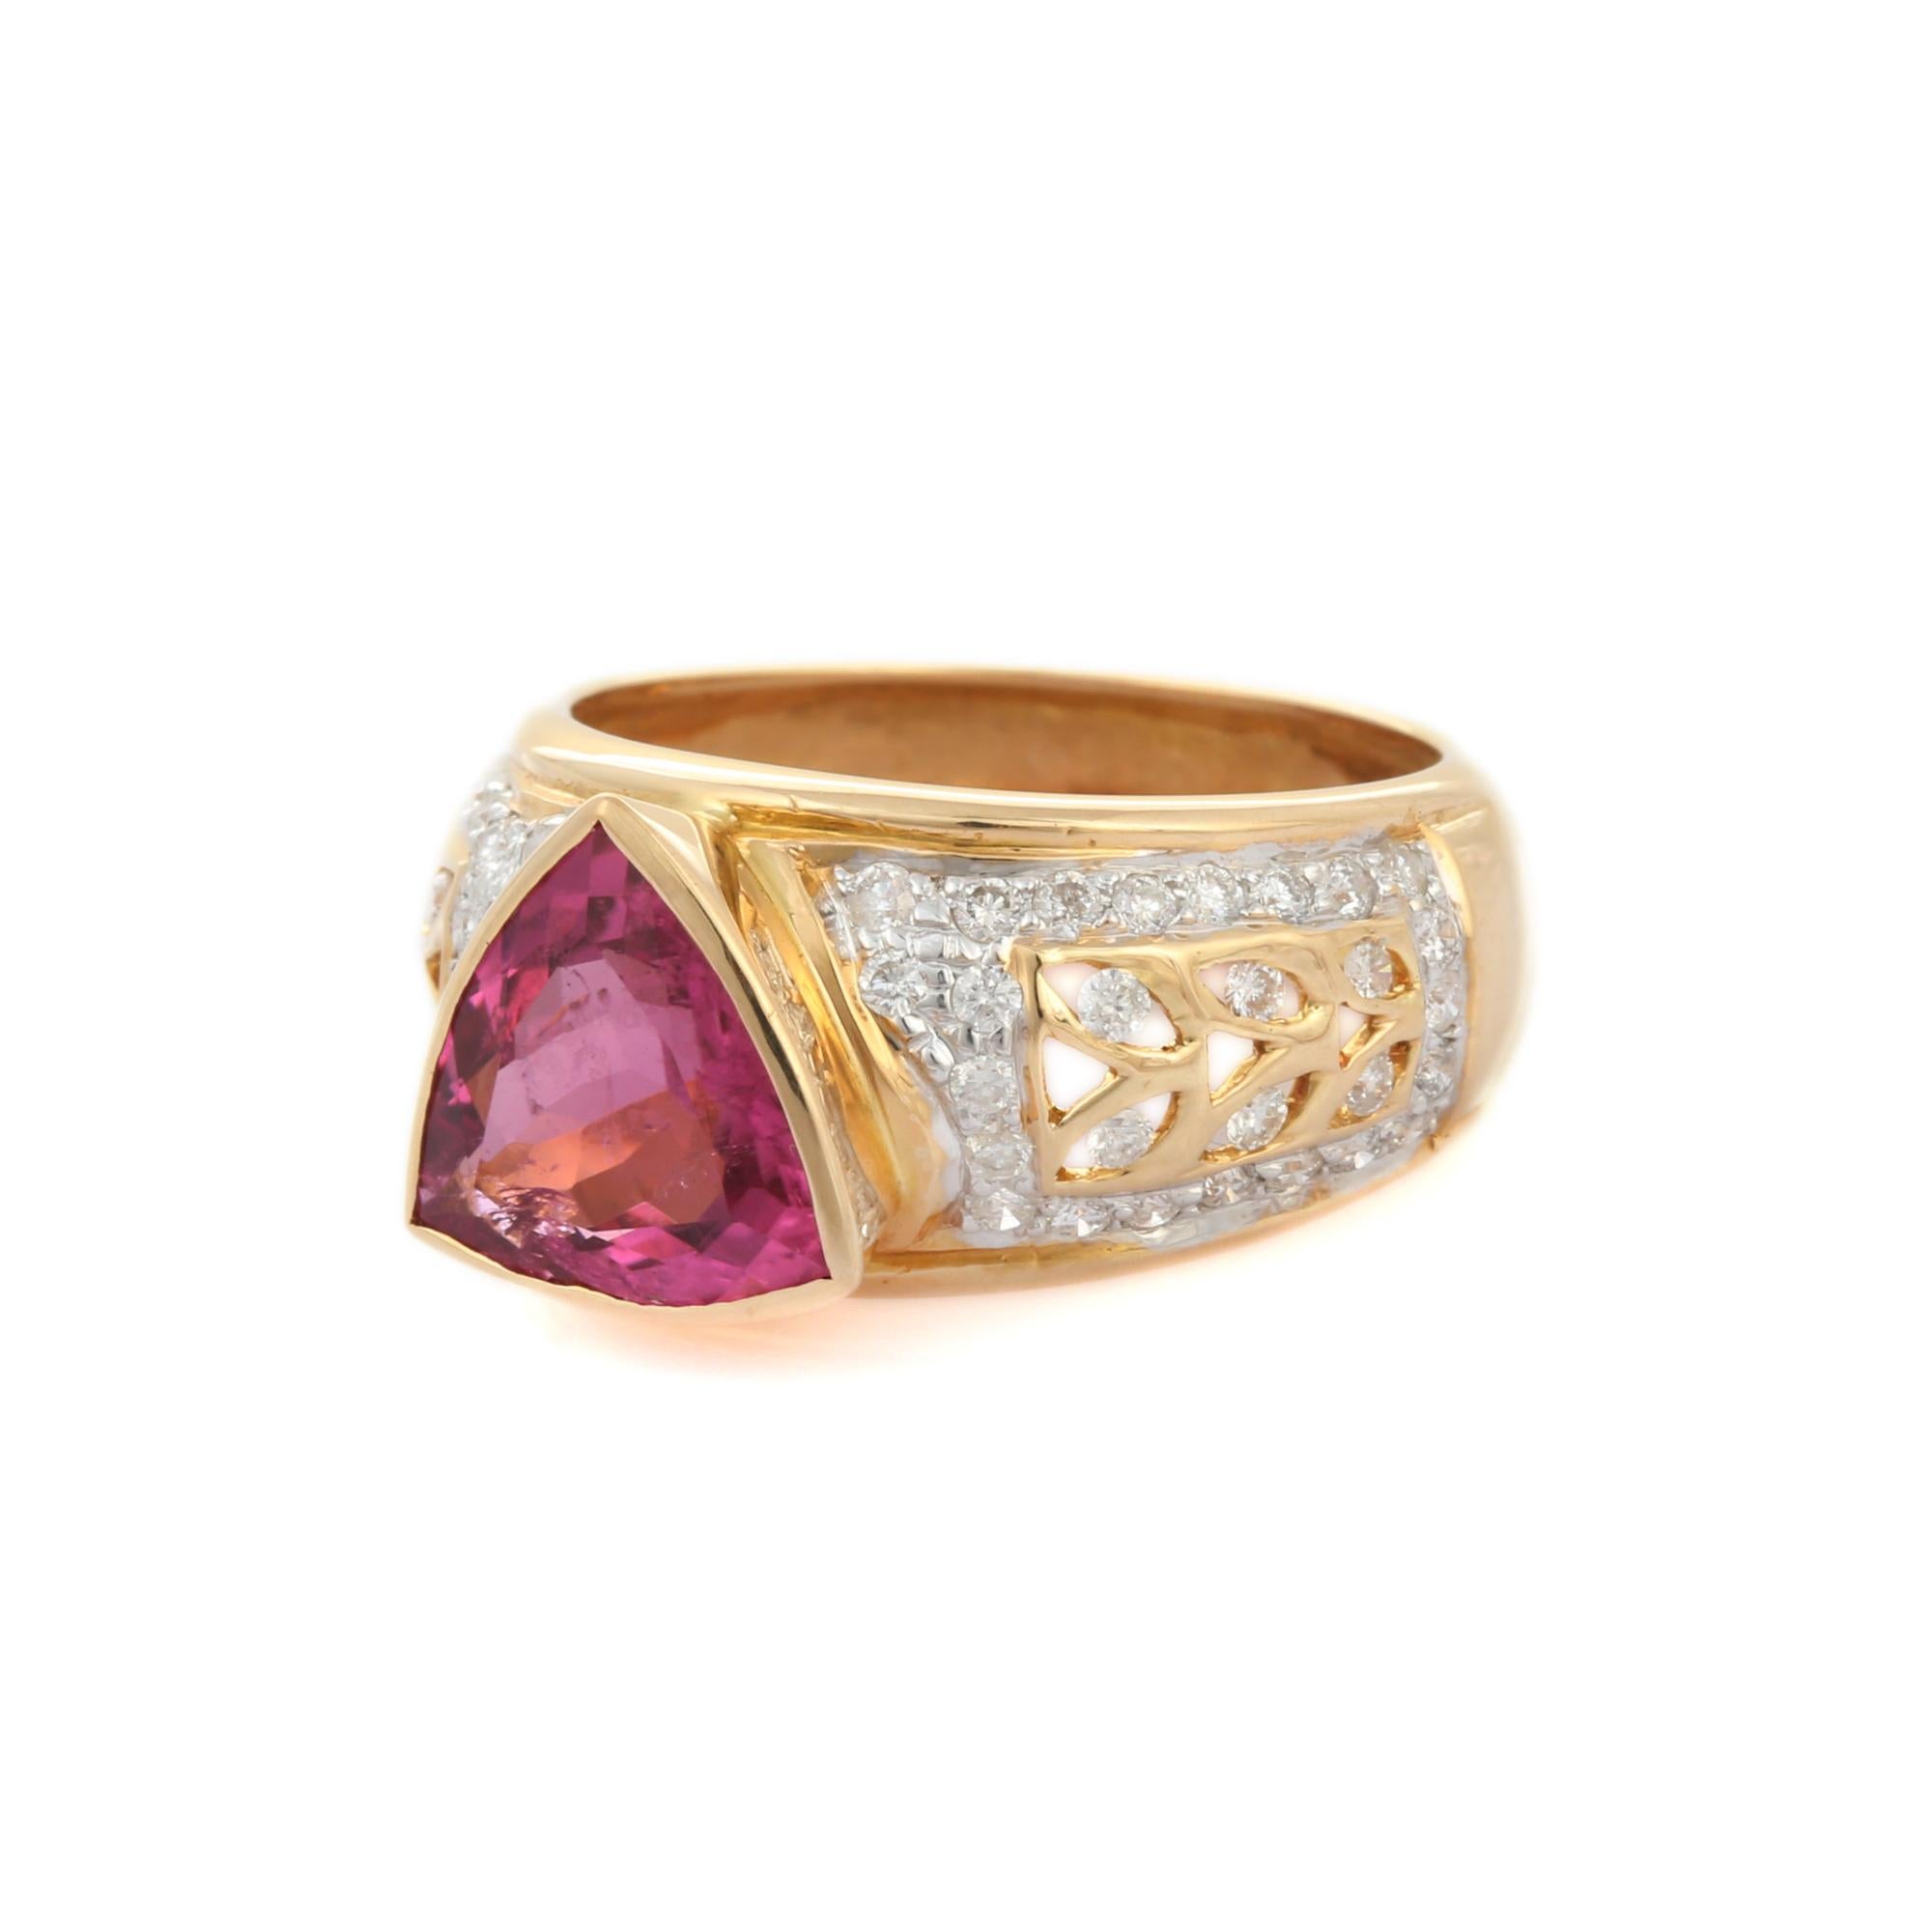 For Sale:  2.81 Carat Trillion cut Ruby Diamond Bridal Ring in 18K Yellow Gold  3